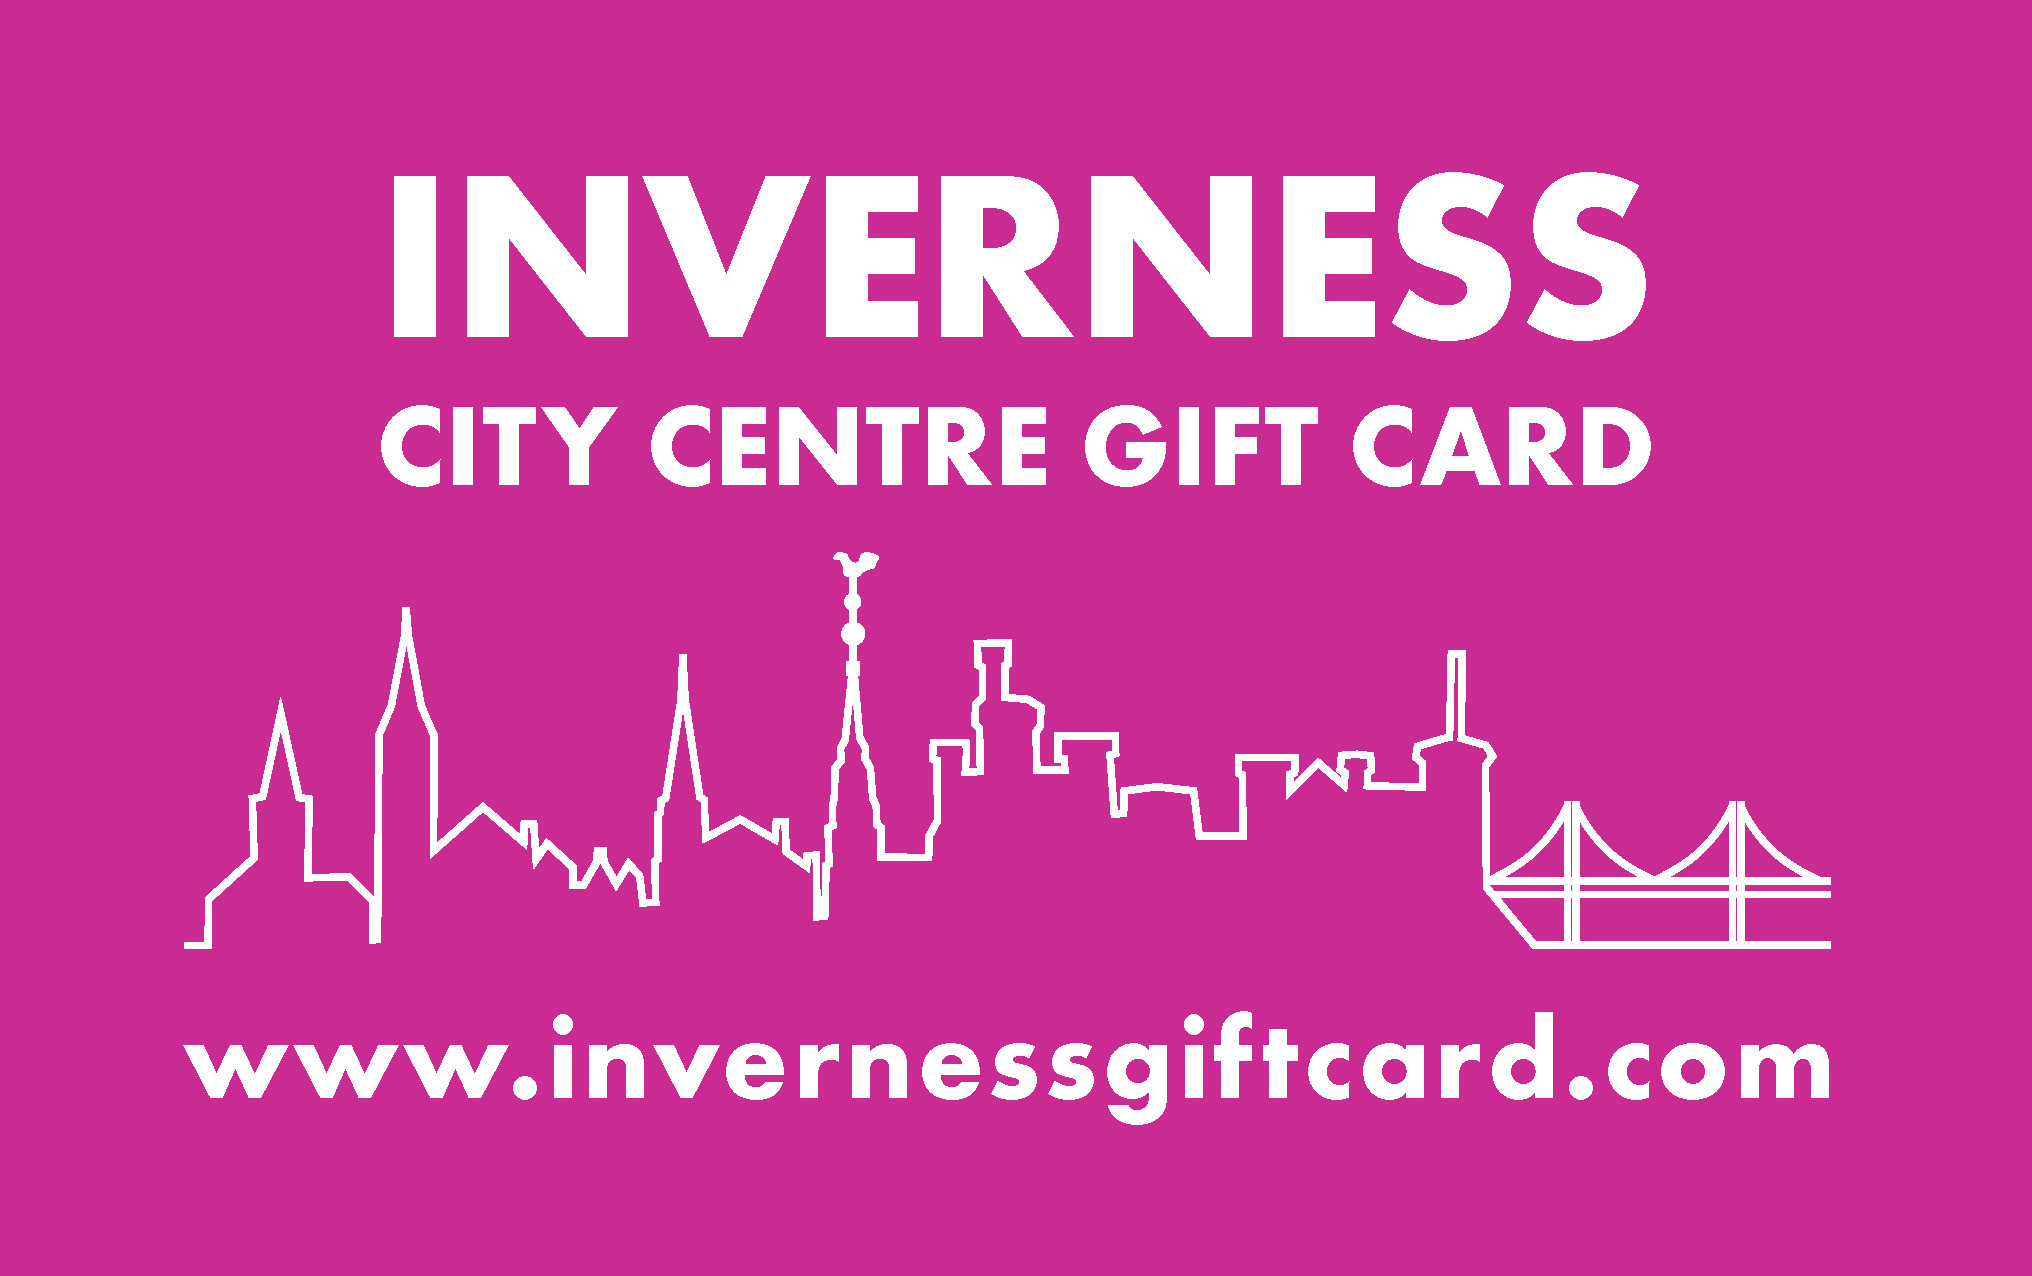 New Inverness City Centre Gift Card Coming Soon